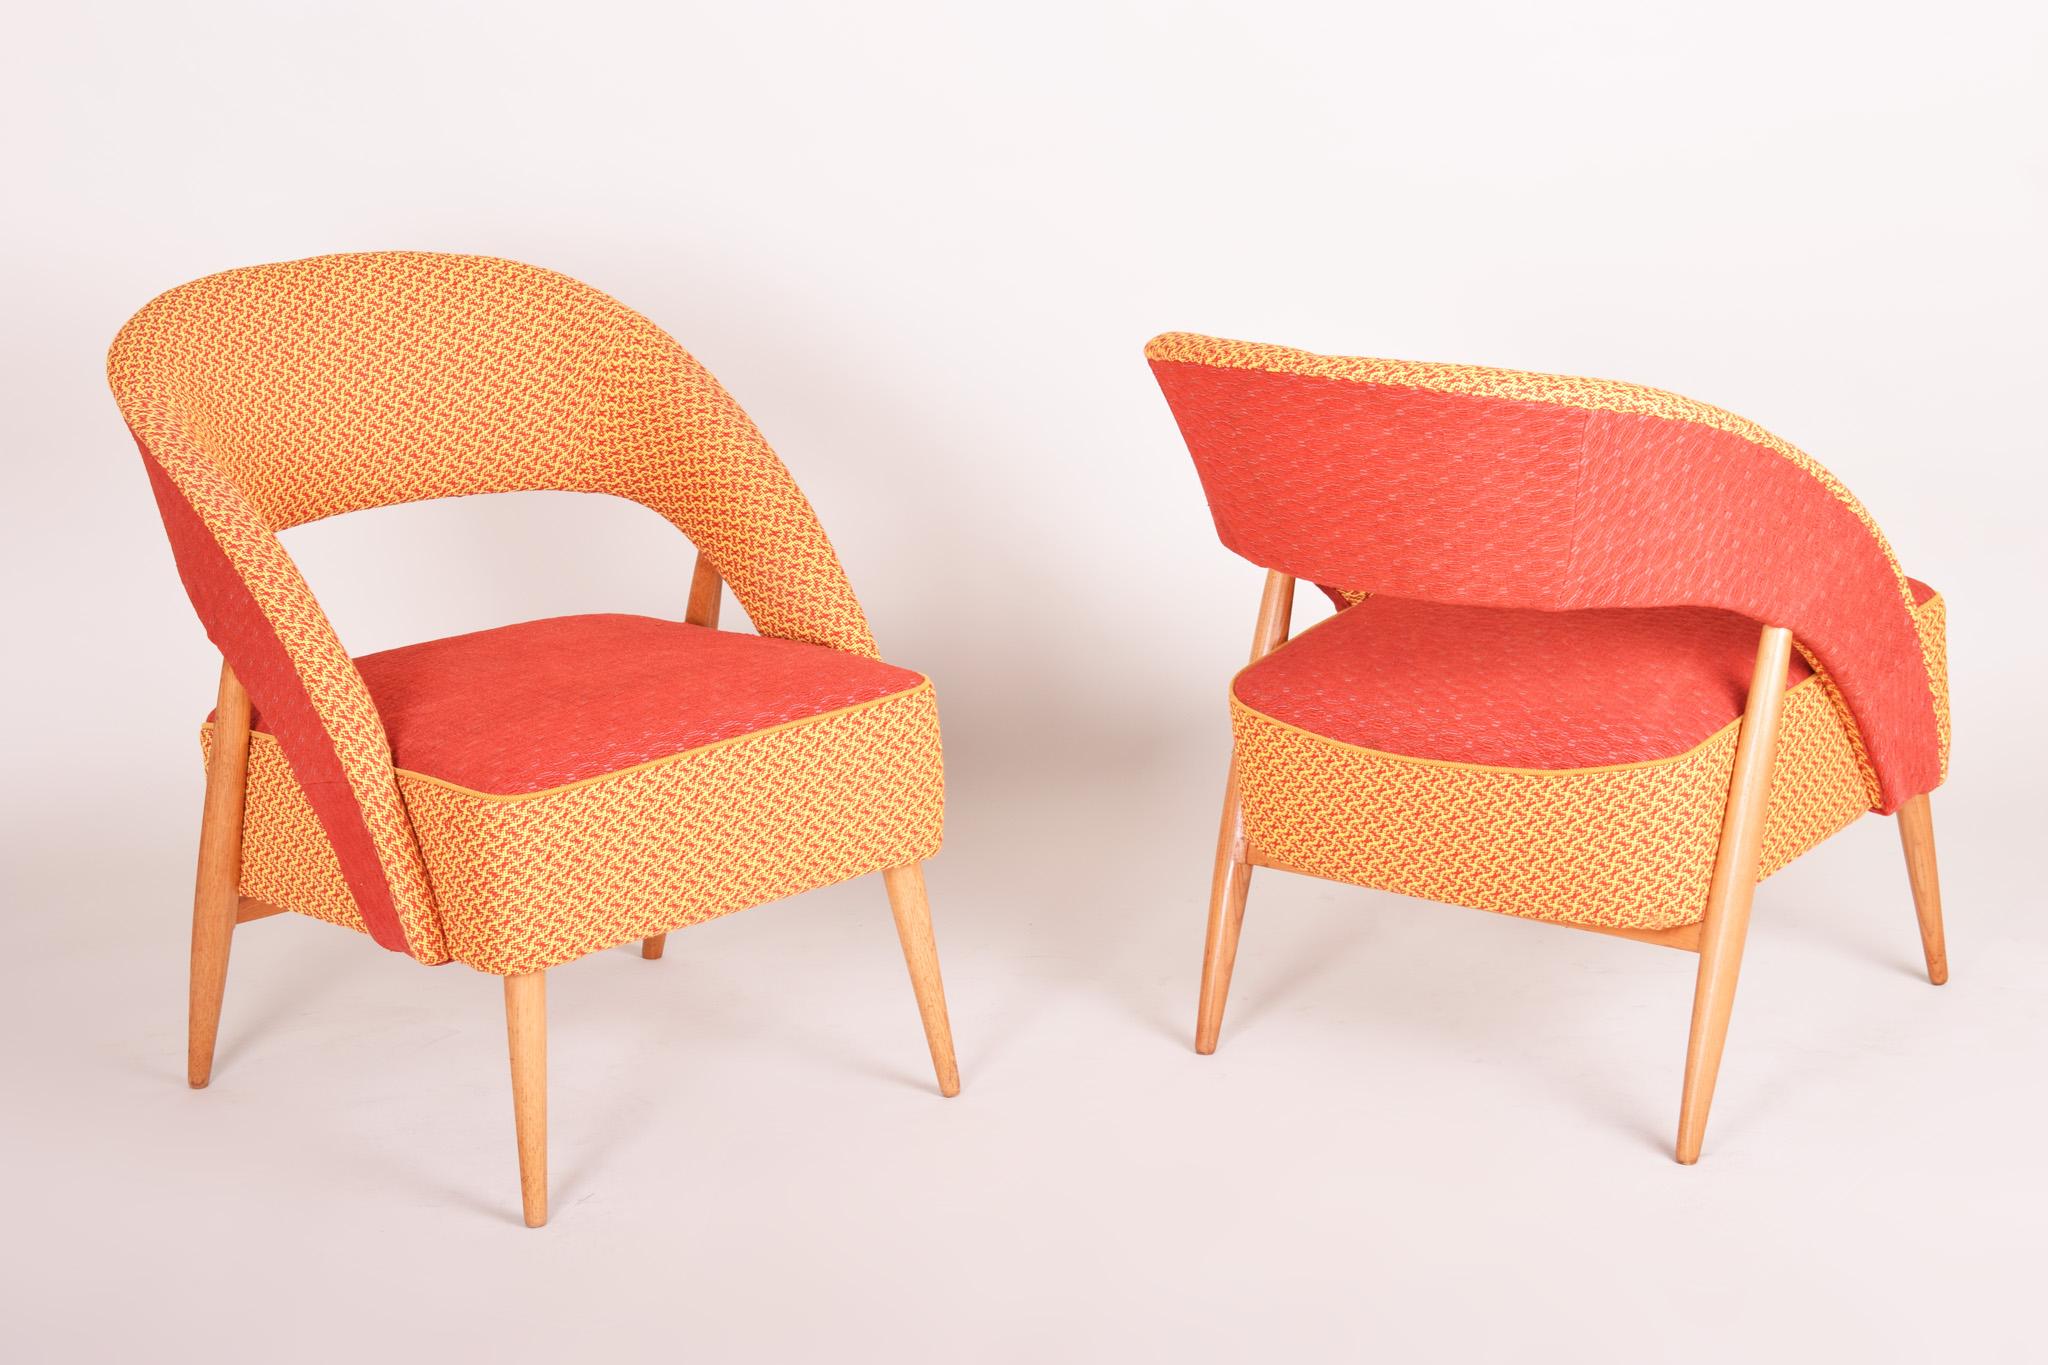 Mid Century Red and Orange Chairs, Made in 1940s, Czechia, Restored by Our Team In Good Condition For Sale In Horomerice, CZ